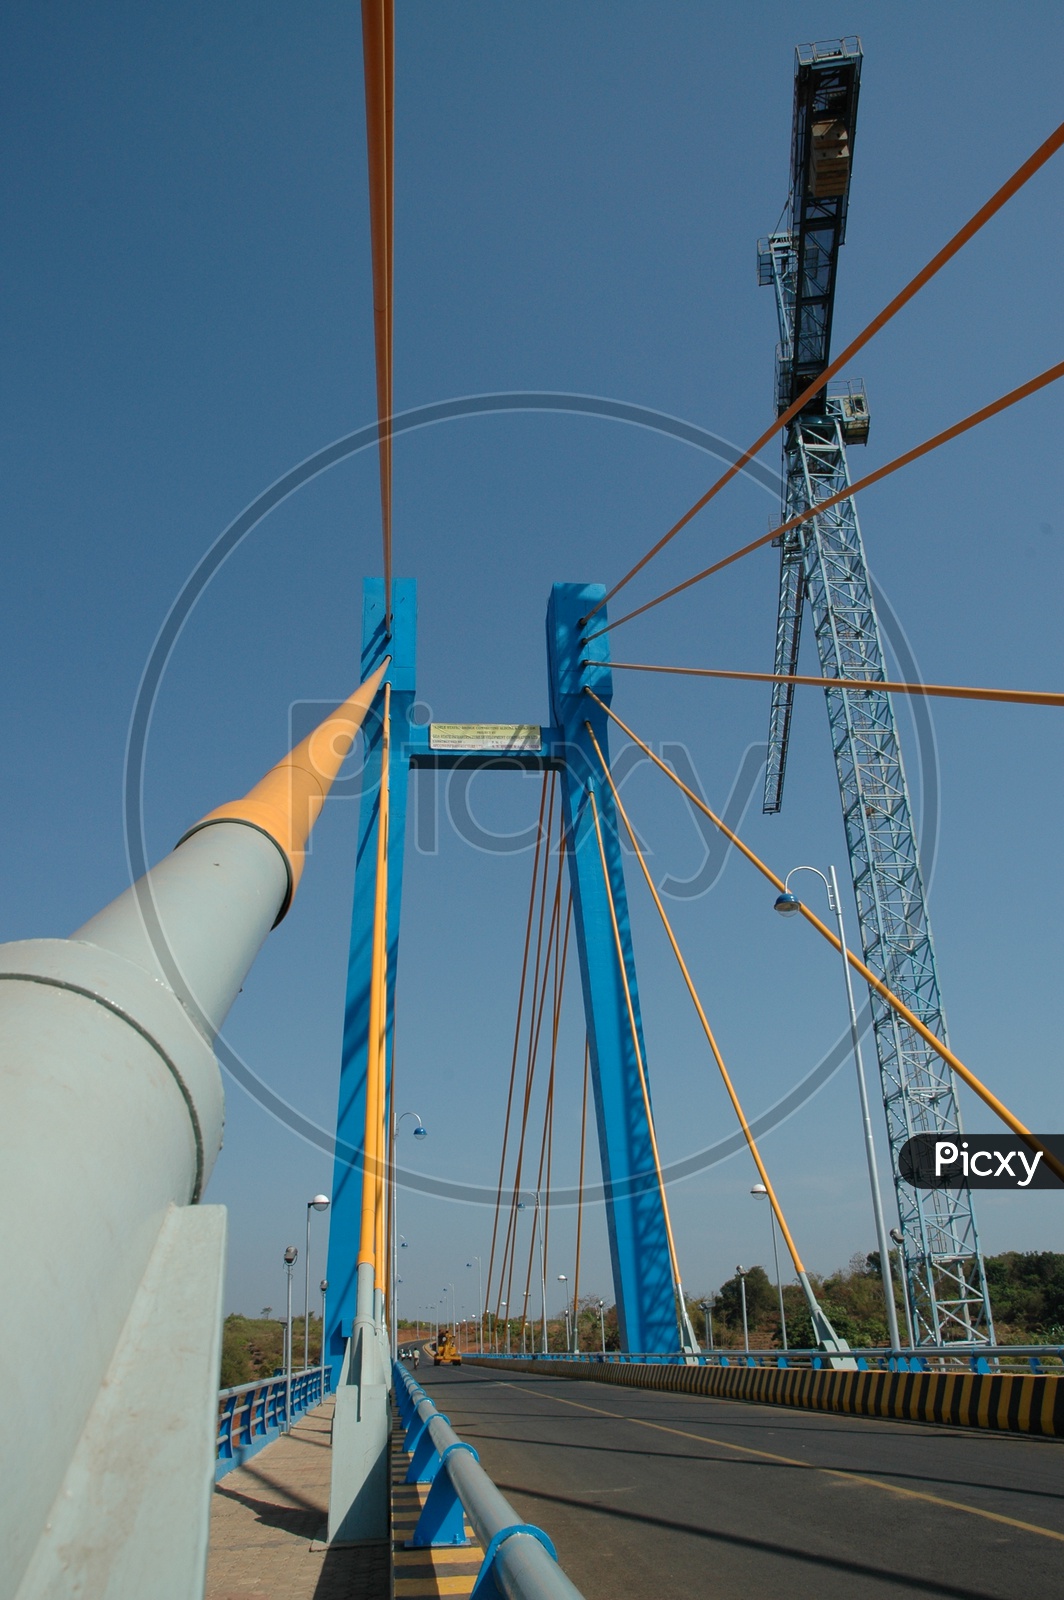 A crane on the cable stayed bridge connecting Aldona and Corjuem